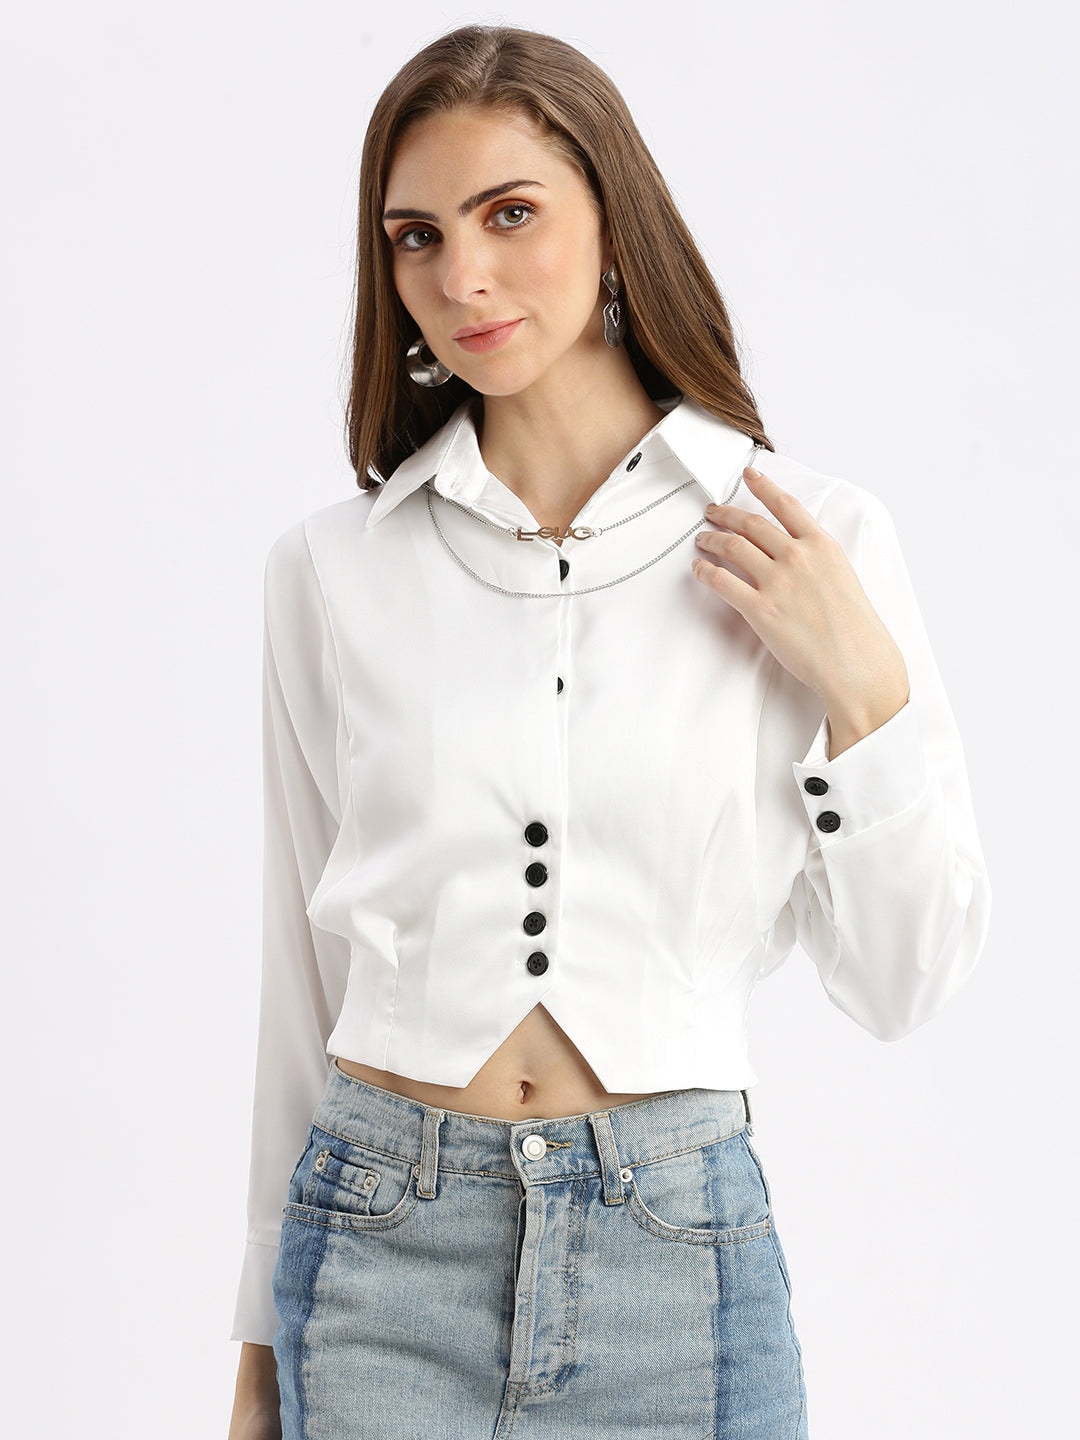 Women Solid White Shirt Style Smocked Top with Neck Chain